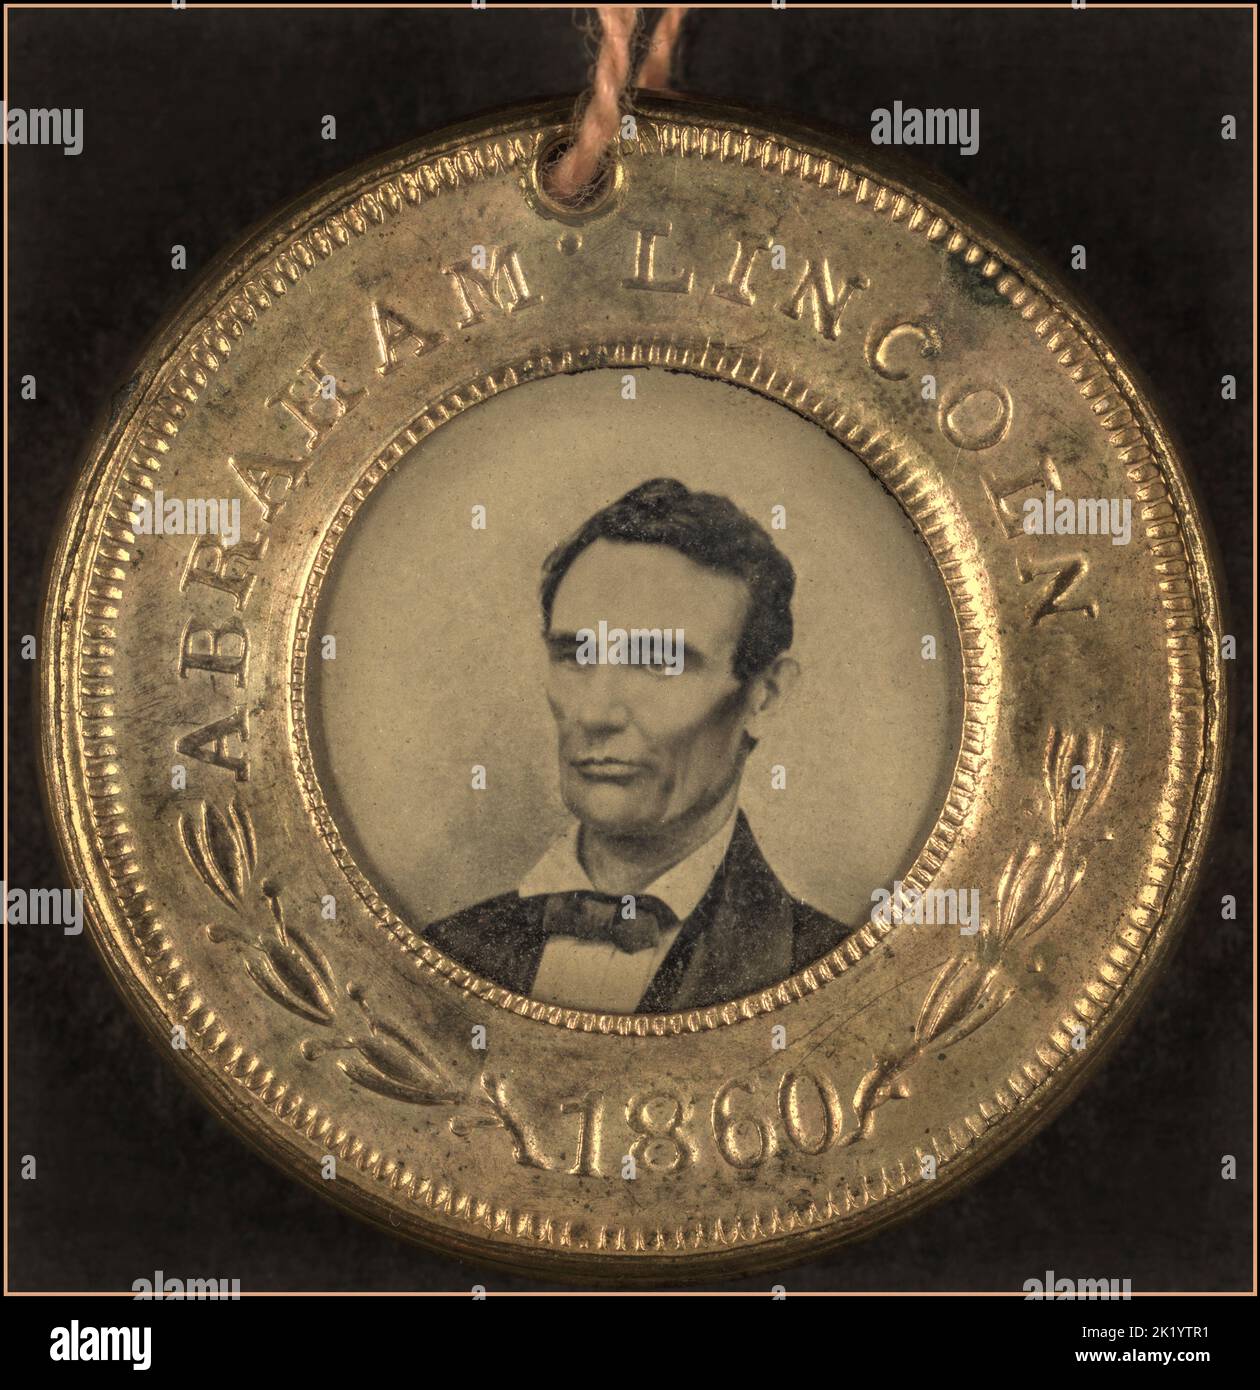 LINCOLN Presidential Campaign button for Abraham Lincoln, 1860. Portrait appears in tintype. Reverse side of button is a tintype of running mate Hannibal Hamlin. One of the earliest examples of photographic images on political buttons. Date 1860 Stock Photo